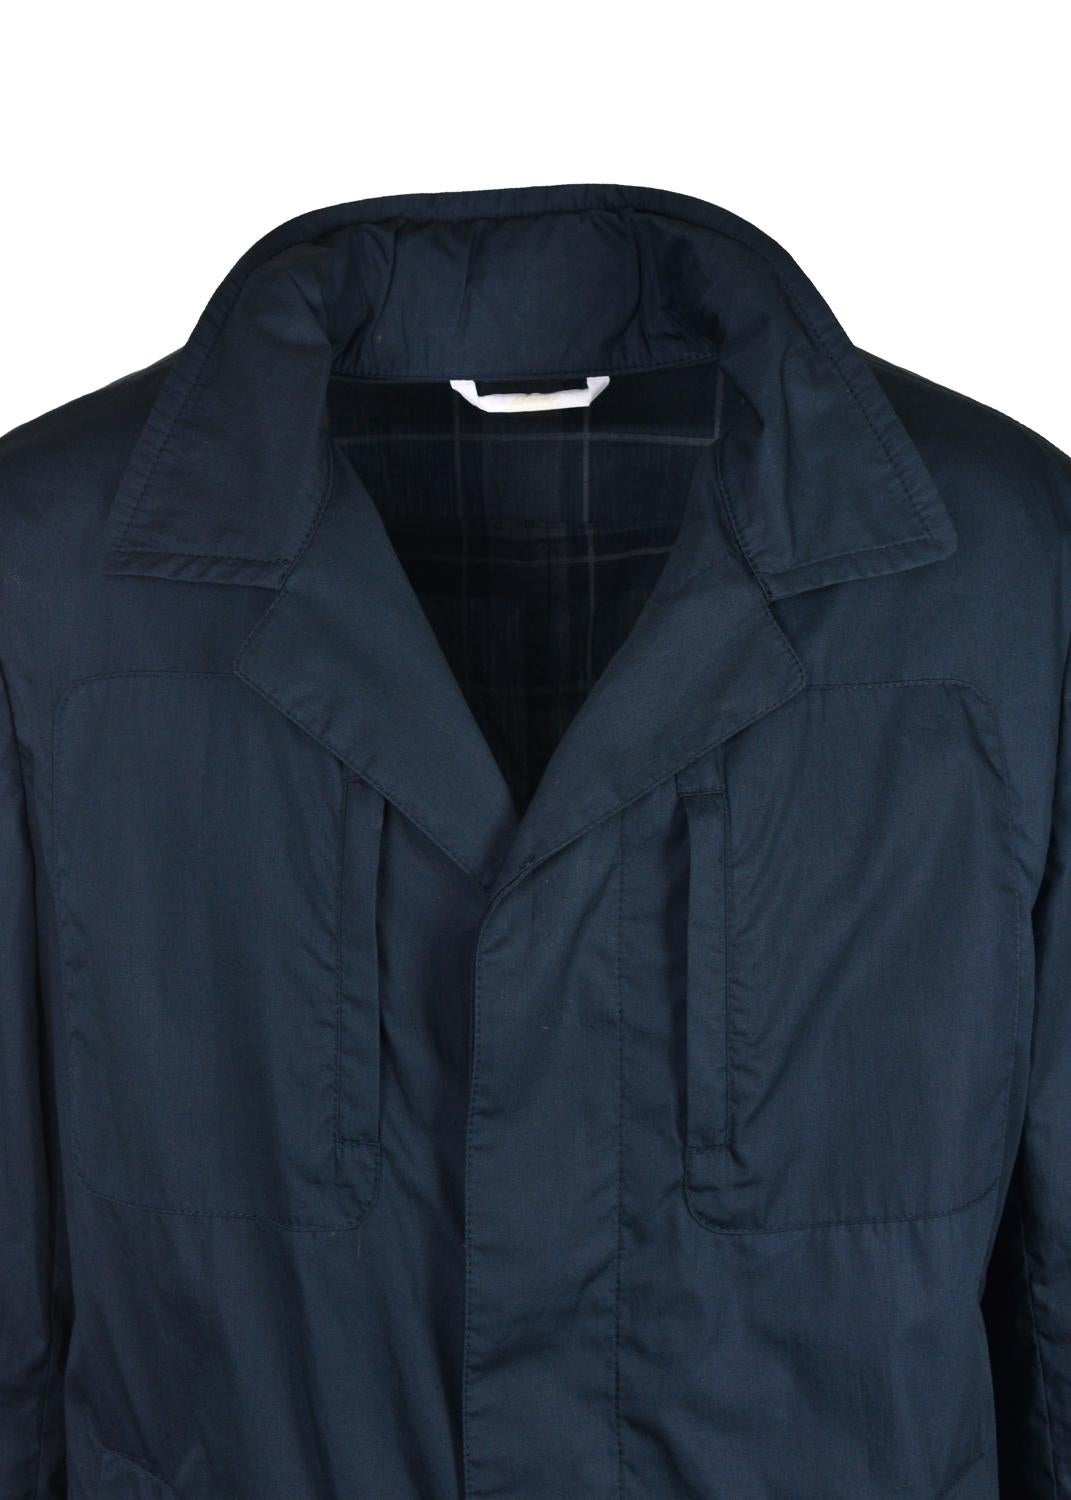 Weather all storms in style with your Brioni Rain Coat. This dark navy essential features a pure cotton base, concealed zip hood with checkered interior, and 4 utilitarian pockets. Brioni incorporates an easy to store feature with the interior full